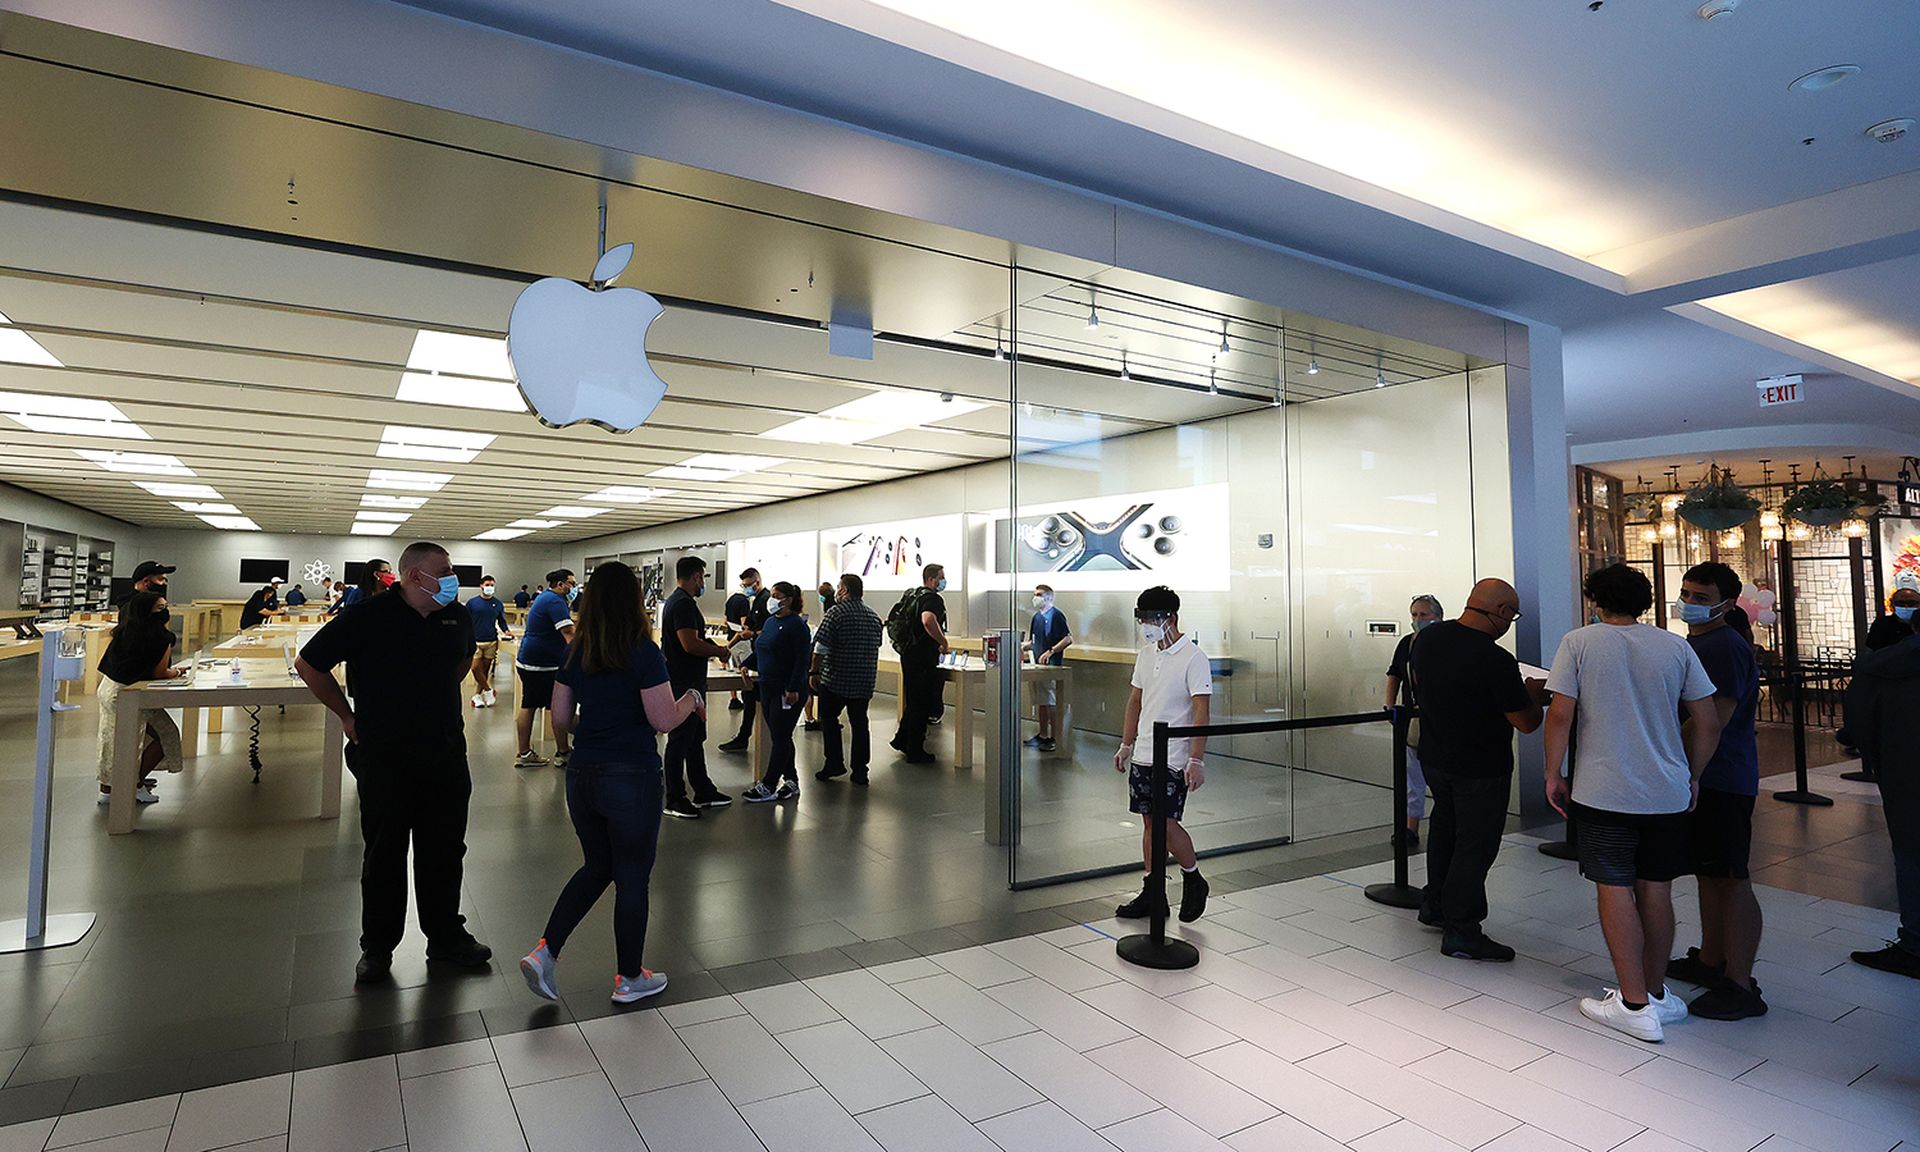 Customers shop at the Apple store at Roosevelt Field Mall on July 10, 2020, in Garden City, N.Y. Researchers at North Carolina State University found an iPhone vulnerability that allows attackers to gain access to to cryptographic keys. (Photo by Al Bello/Getty Images)